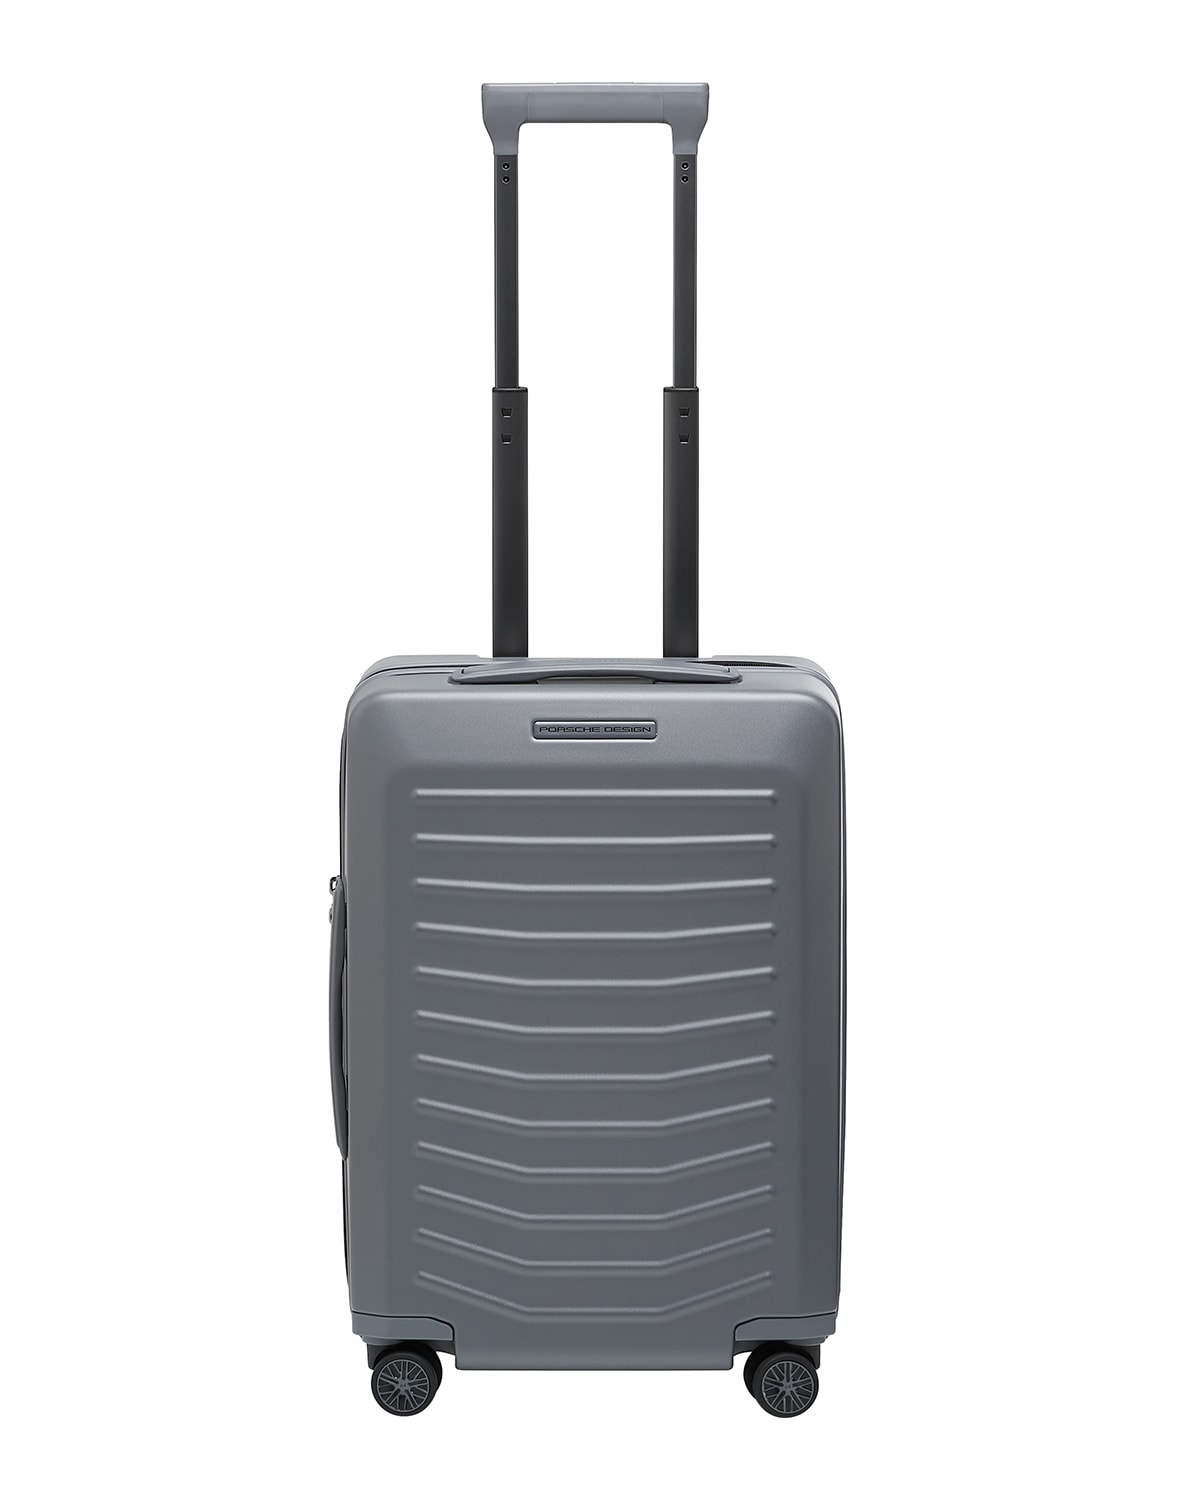 Roadster 21" Carry-On Spinner Luggage